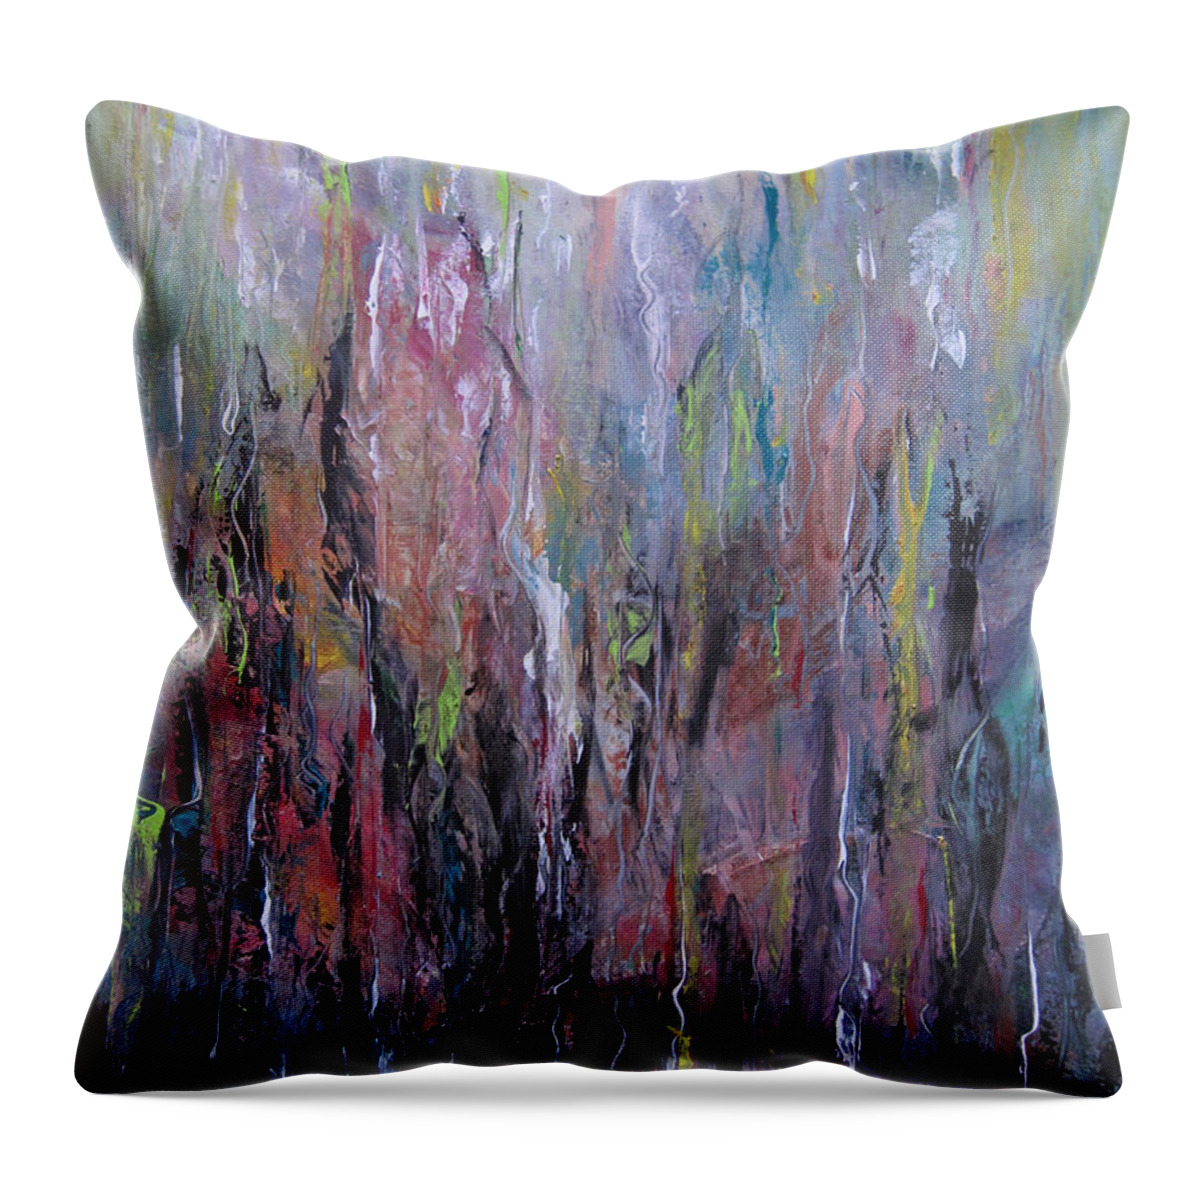 Abstract Throw Pillow featuring the painting Keeping Pace by Roberta Rotunda